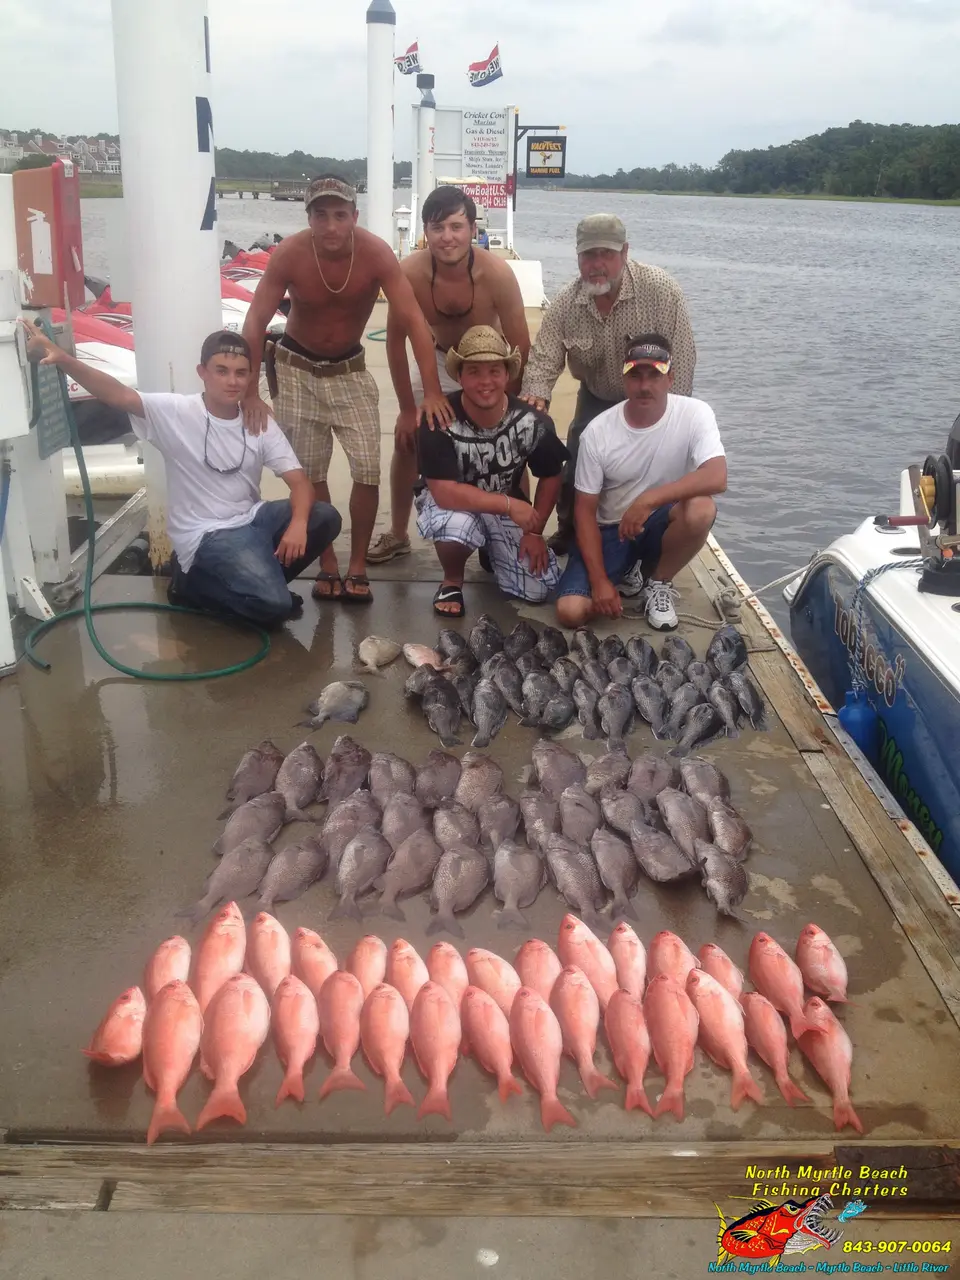 Reel Time Fishing Charters knows how to reel in a big haul